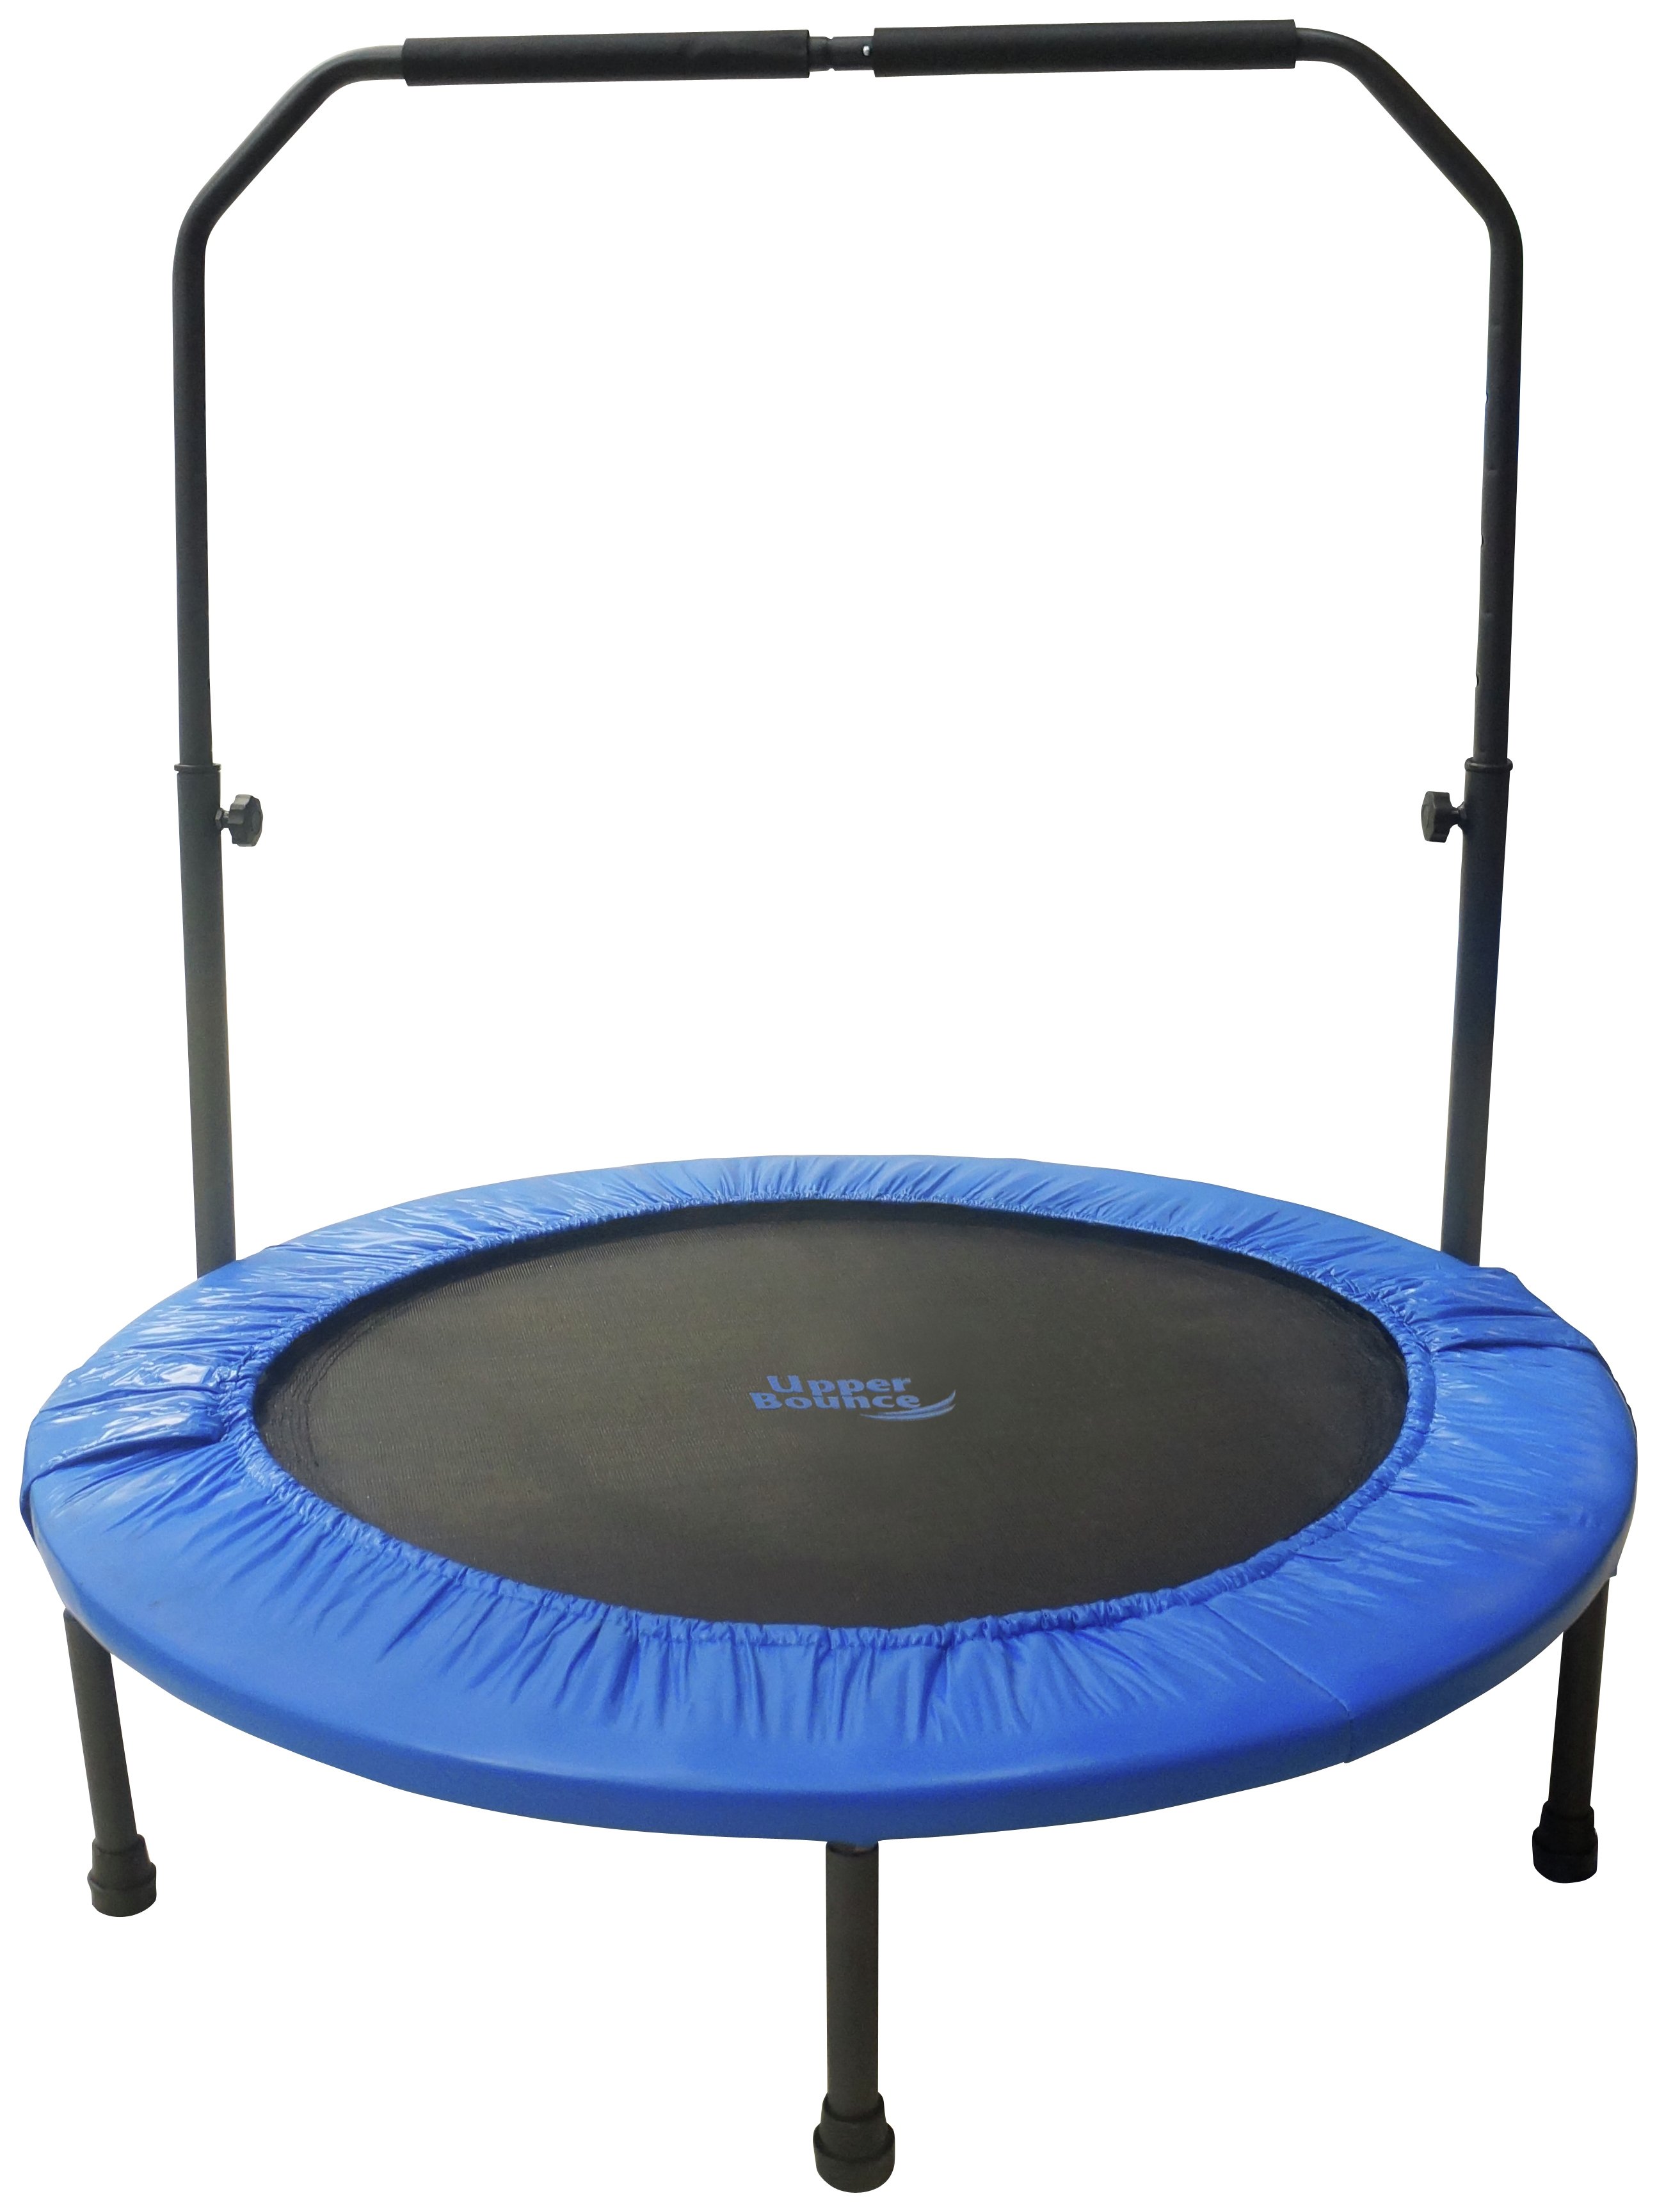 Upper Bounce 40 Inch Mini Foldable Trampoline with Handrail.